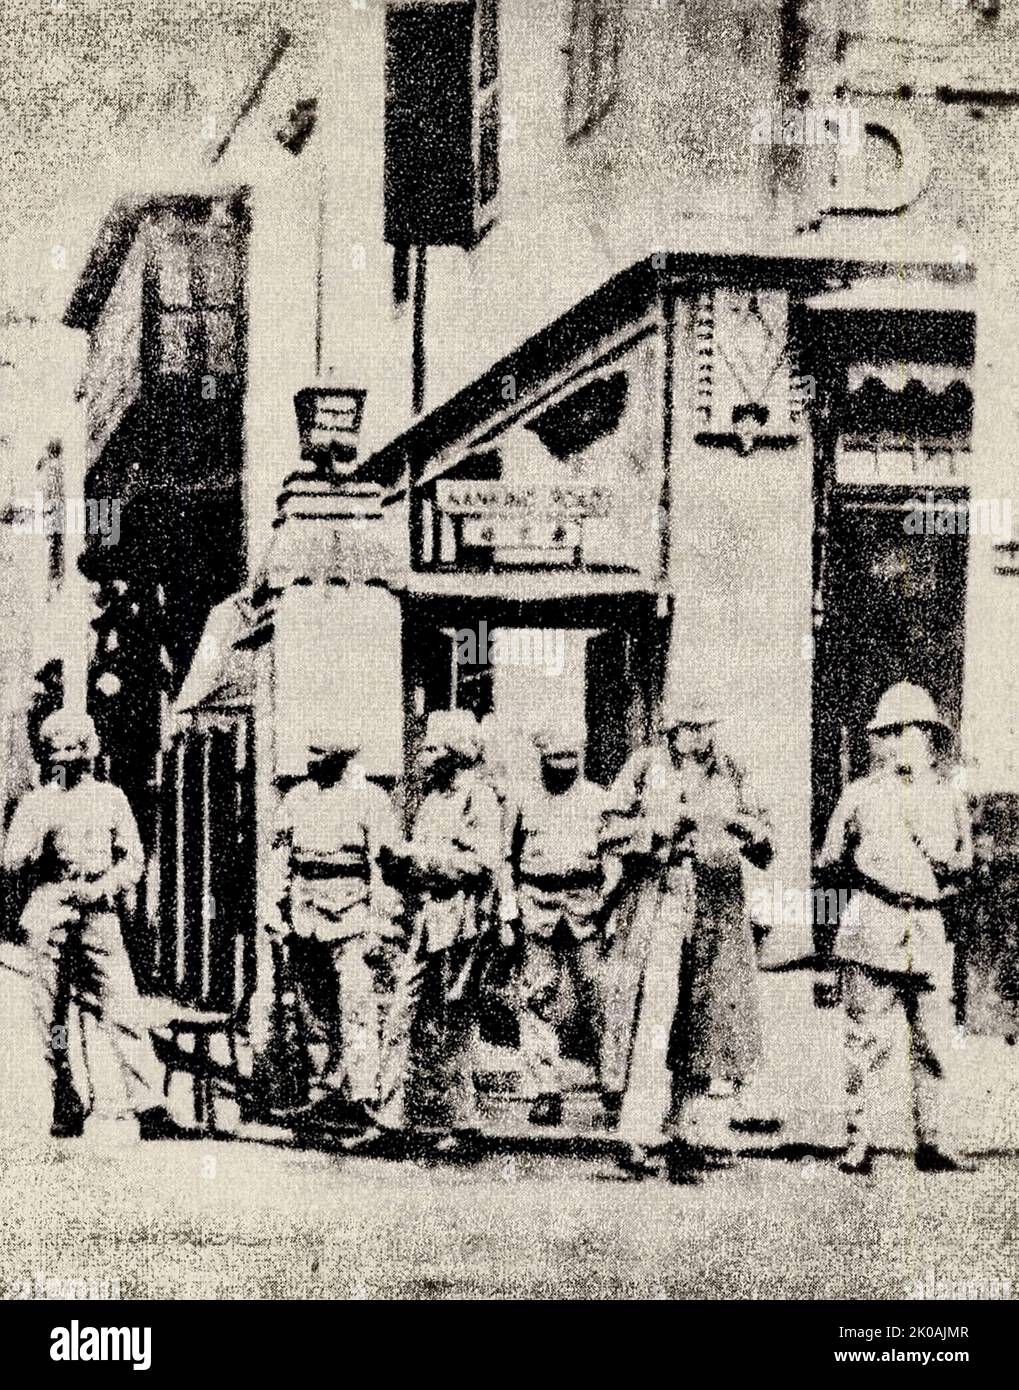 Louza Station (Presently No. 772 on East Nanjing Road, Shanghai) is densely populated by Xibu personnel. Xibu are British patrol members. This was pictured during the May Thirtieth Movement. The May Thirtieth Movement was a major labour and patriotic movement against imperialist powers led by the Chinese Communist Party. Stock Photo